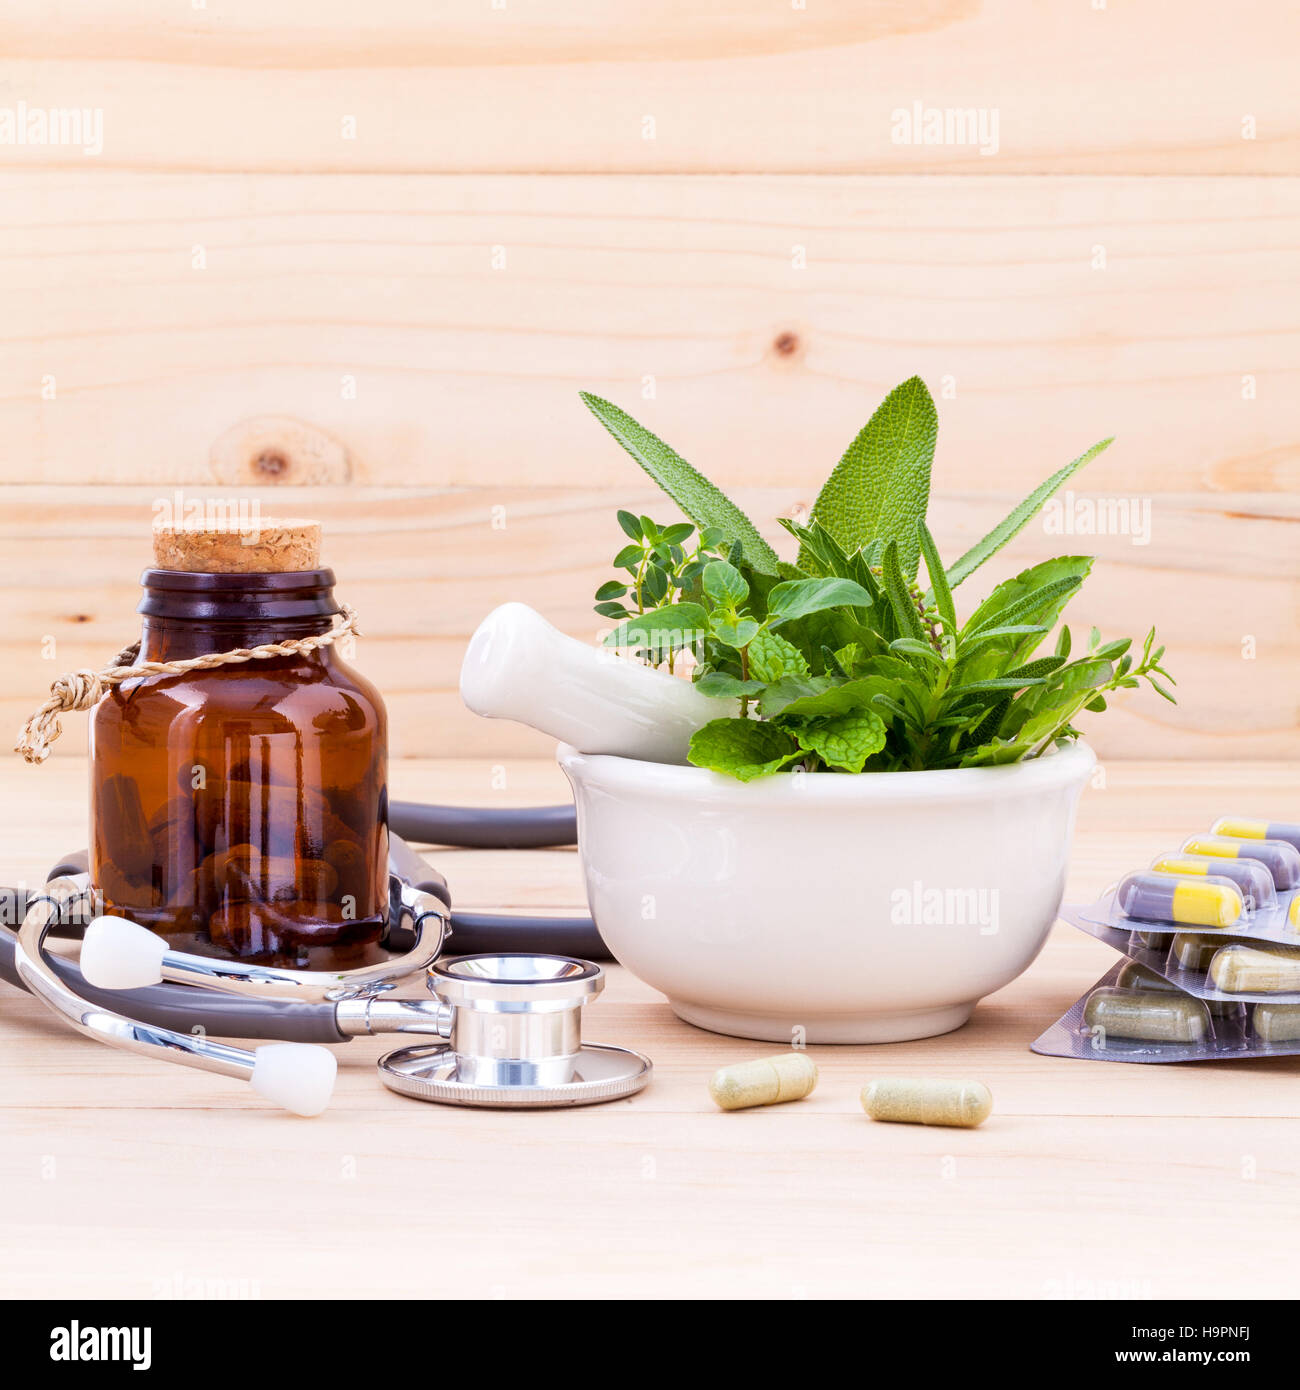 Capsule of herbal medicine alternative healthy care with stethos Stock Photo